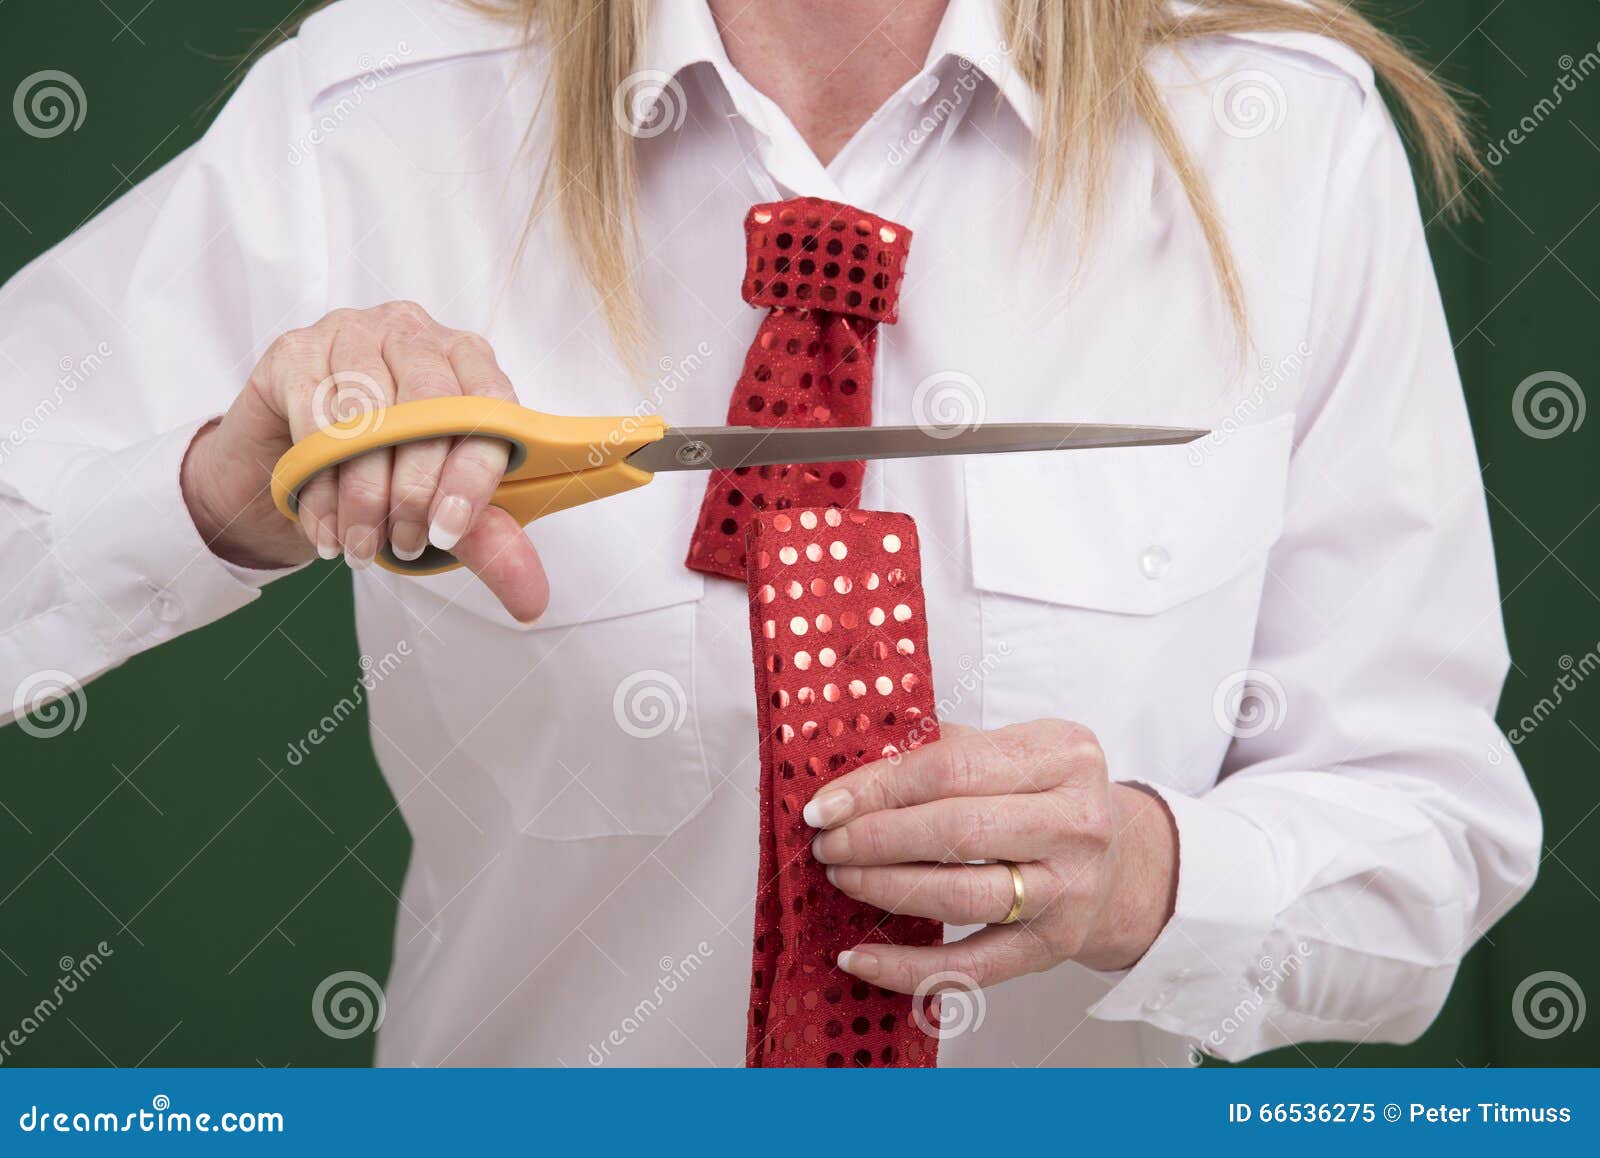 Woman Cutting Through A Necktie With Scissors Stock Image Image Of